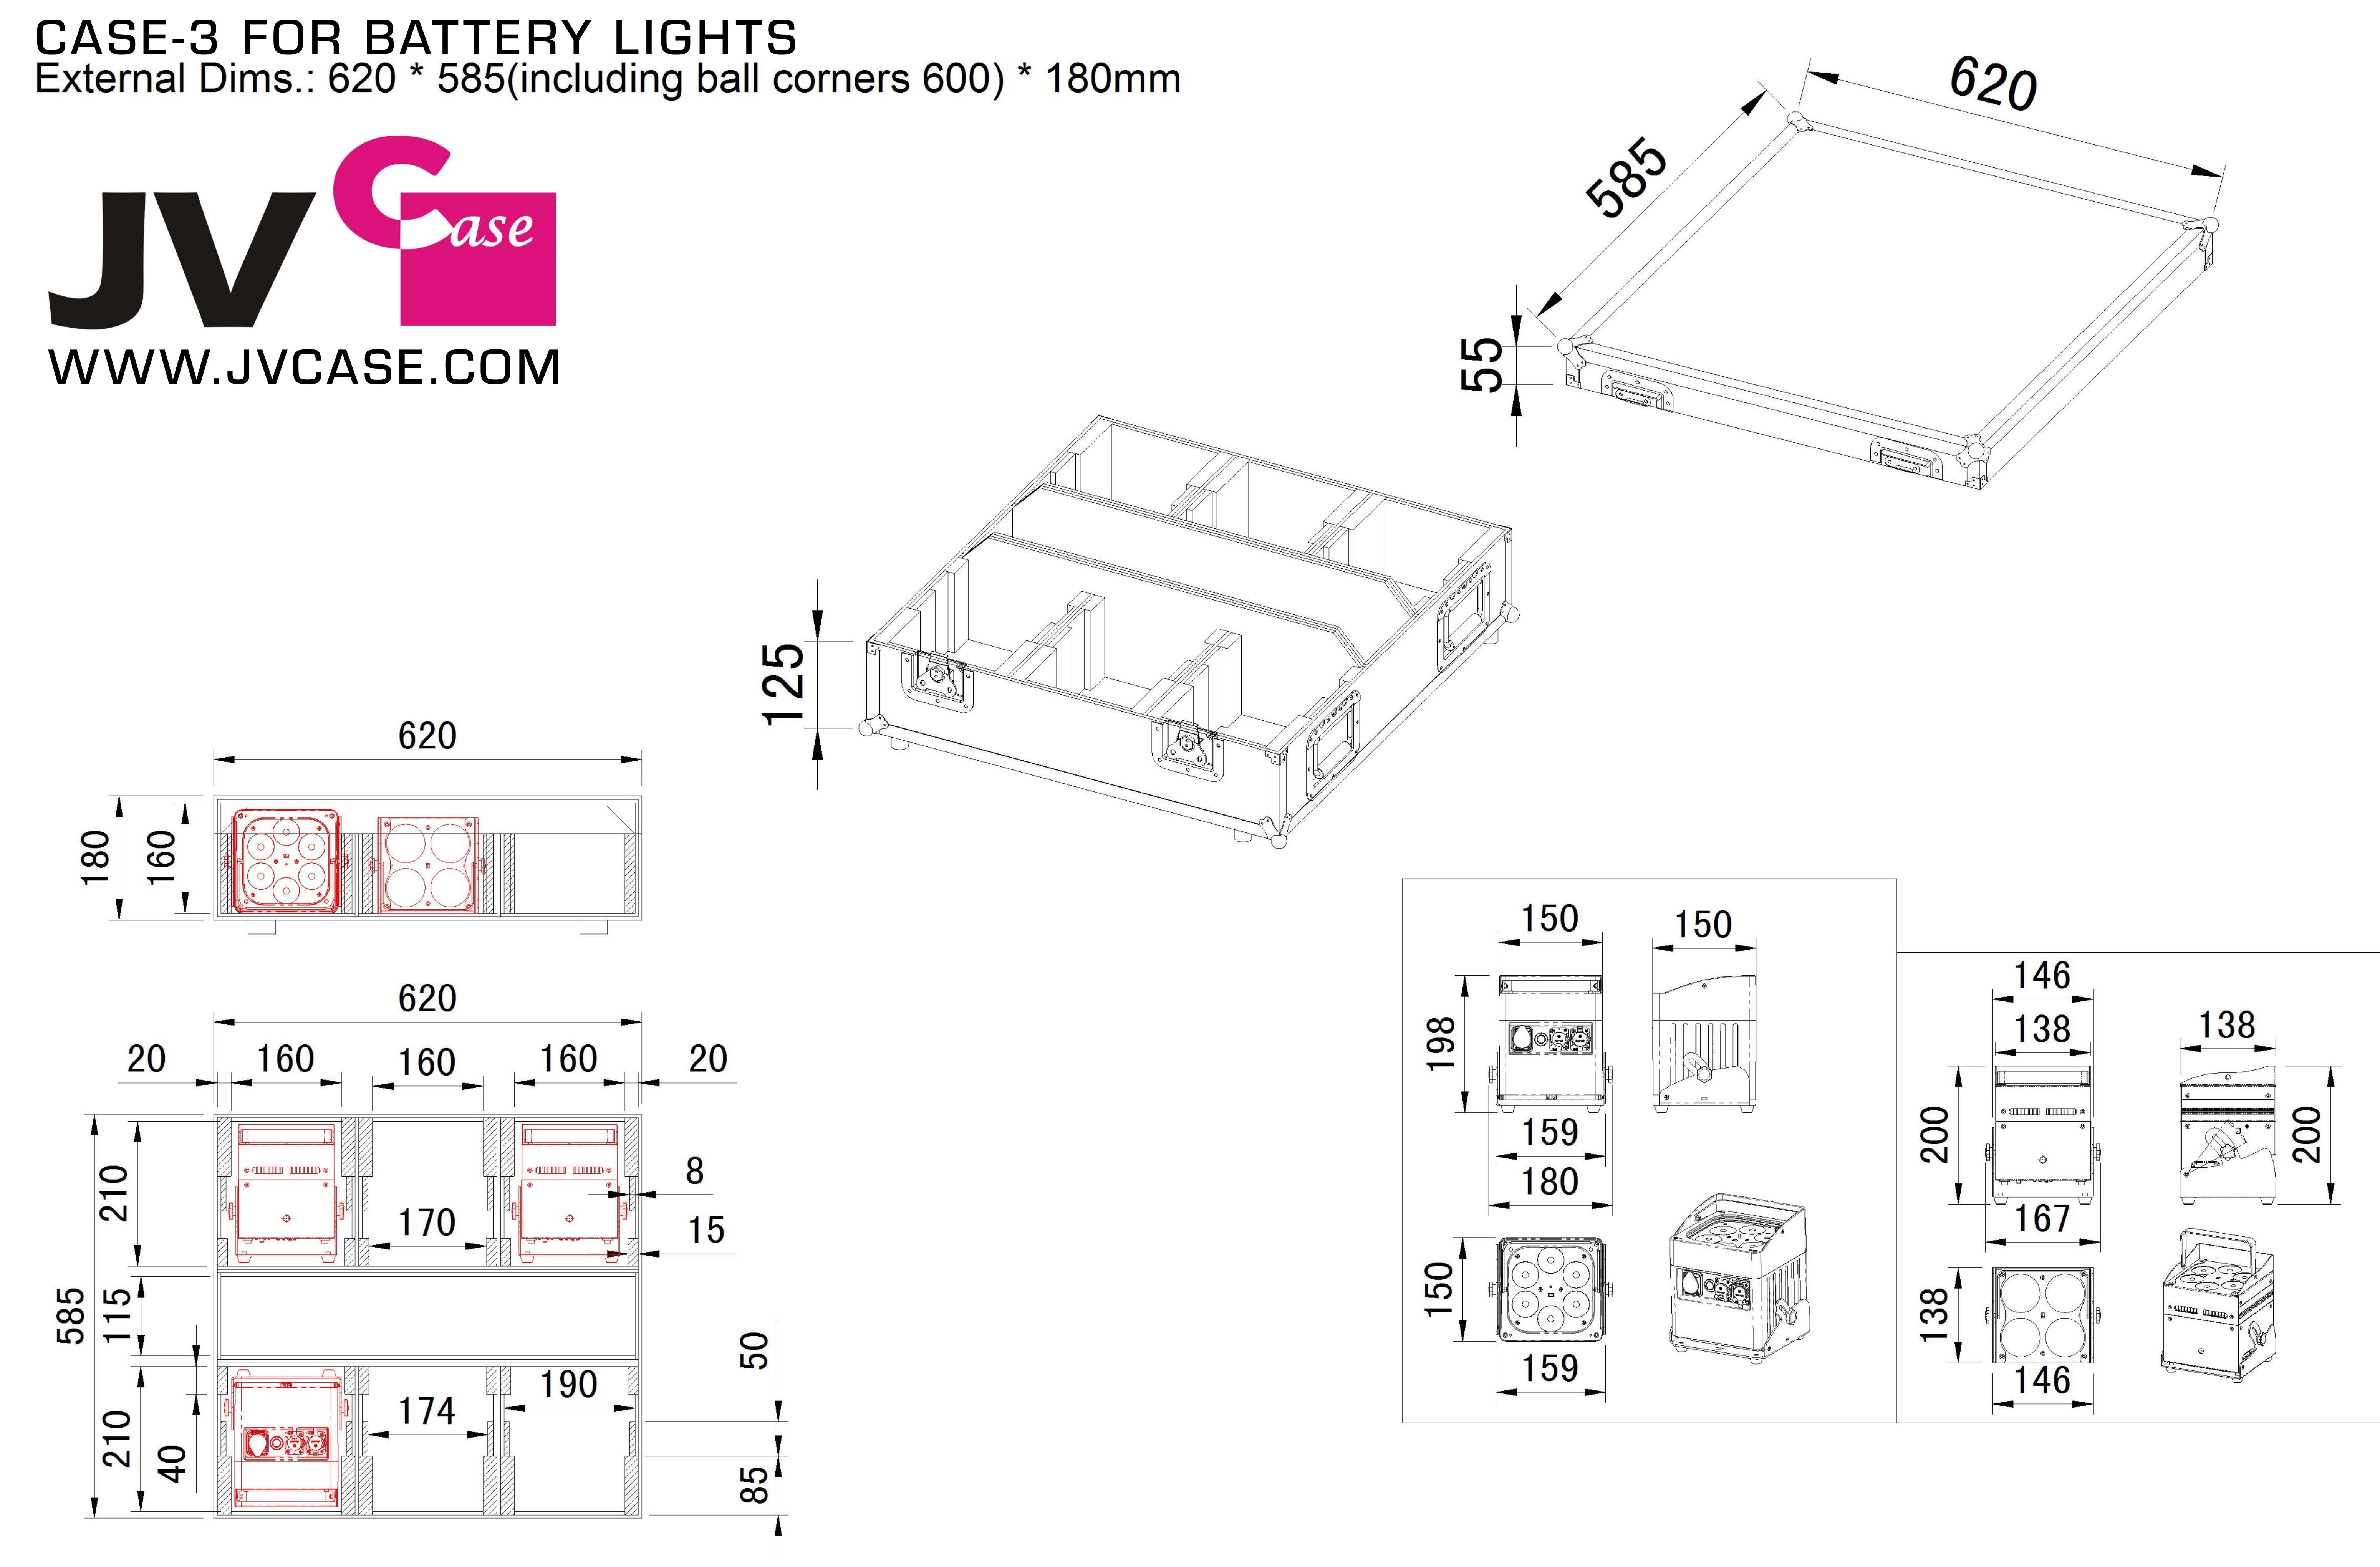 CASE-3 FOR BATTERY LIGHTS - Dimensions